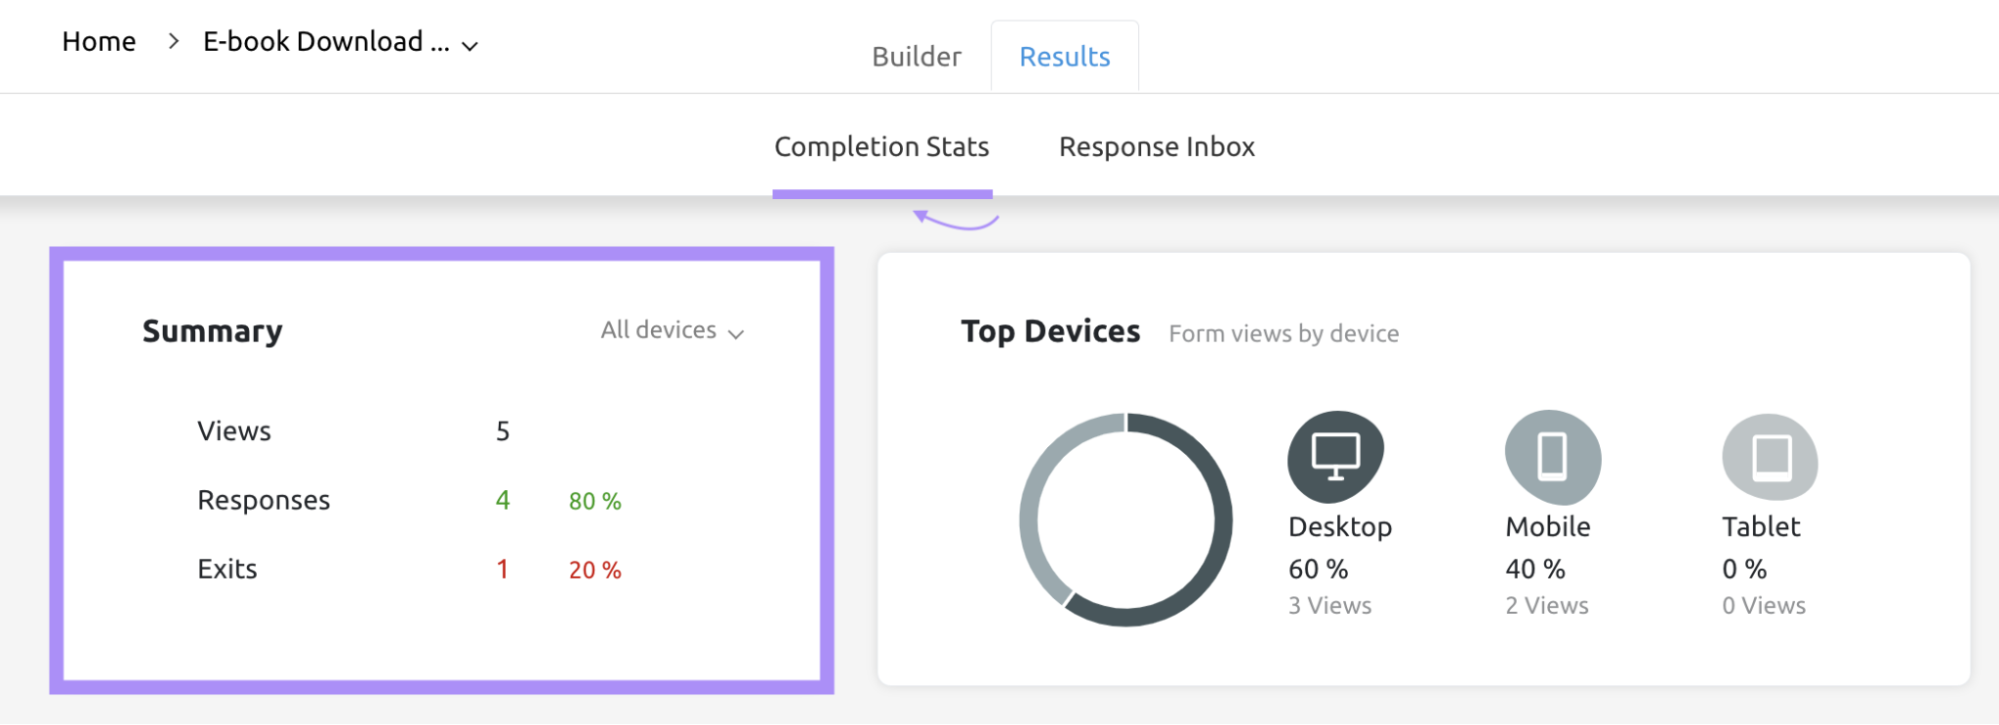 Lead Generation Forms's “Completion Stats” tab